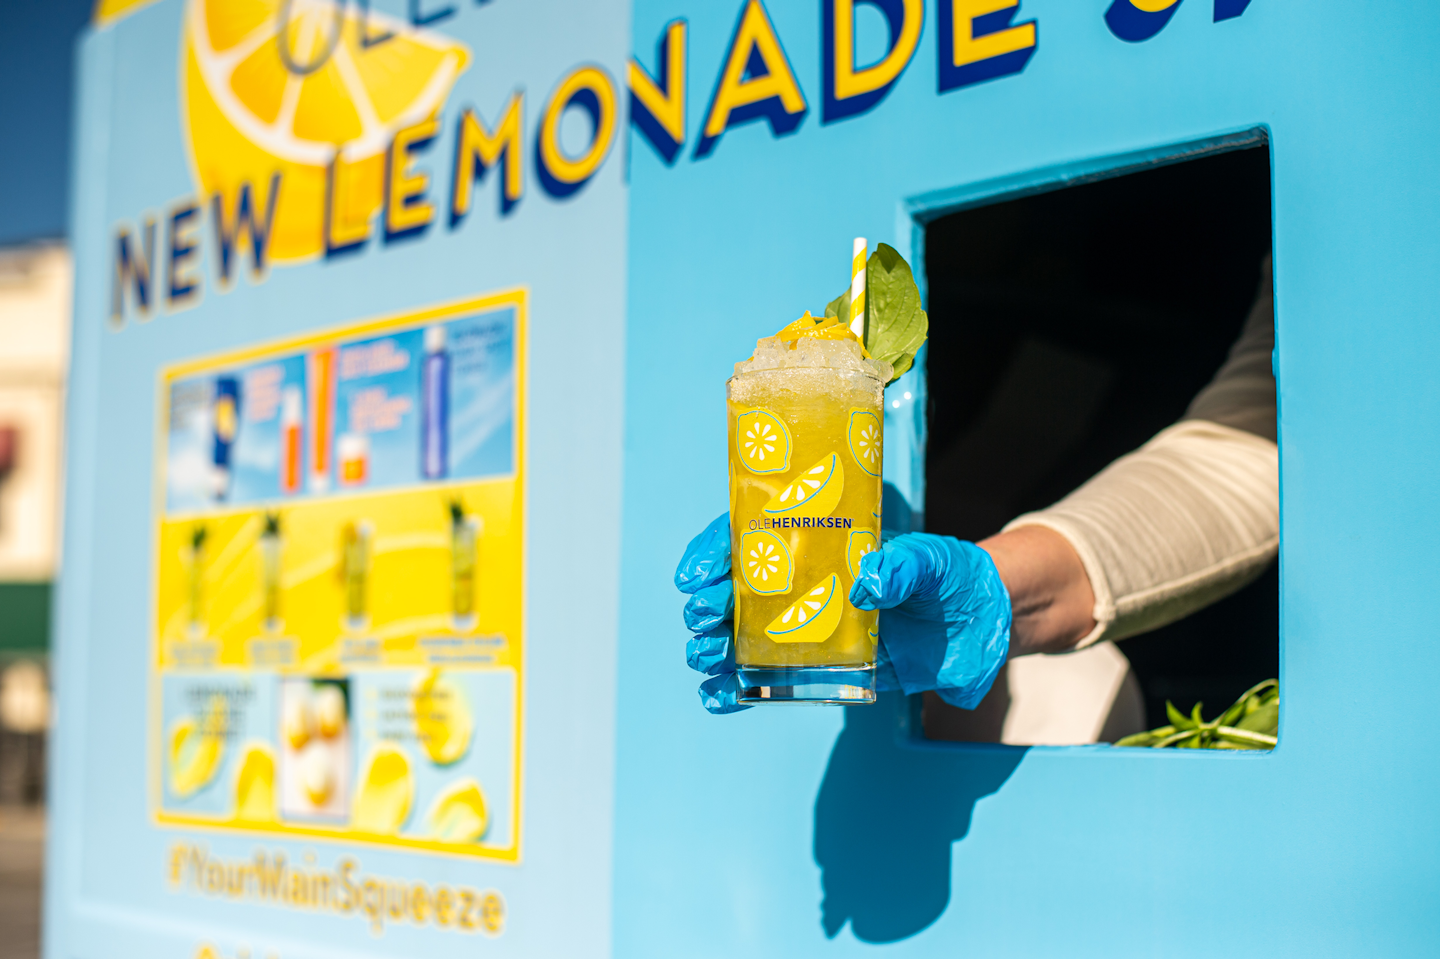 The truck offered cocktails—developed by Sunset Boulevardier—that incorporated organic materials from the product itself. Lemon vegan sorbet, plus VIP gift boxes with branded drinking glasses and yellow sweatshirts and sweatpants, were also handed out.